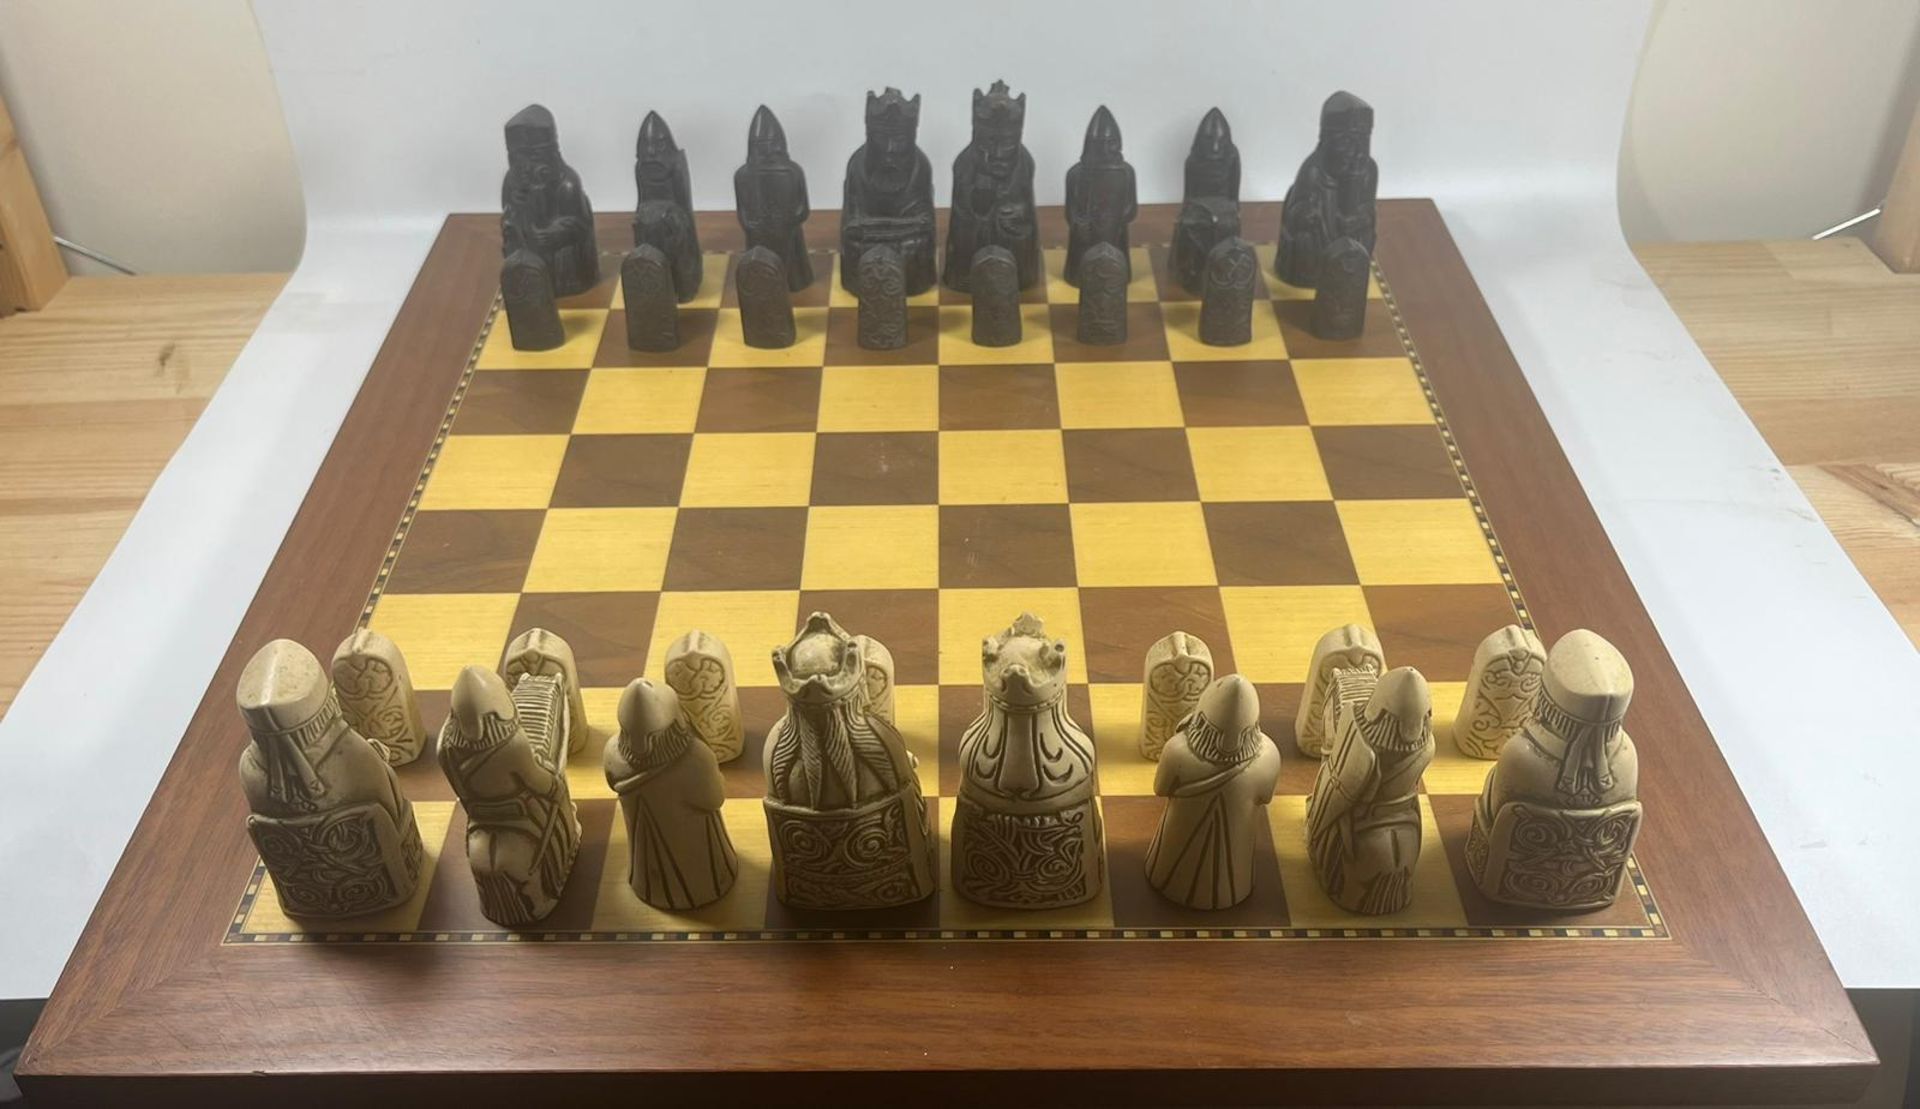 A VINTAGE LEWIS CHESSMEN CHESS SET MODELLED AS MEDIEVAL FIGURES ON AN INLAID WOODEN BOARD, KING - Image 4 of 5